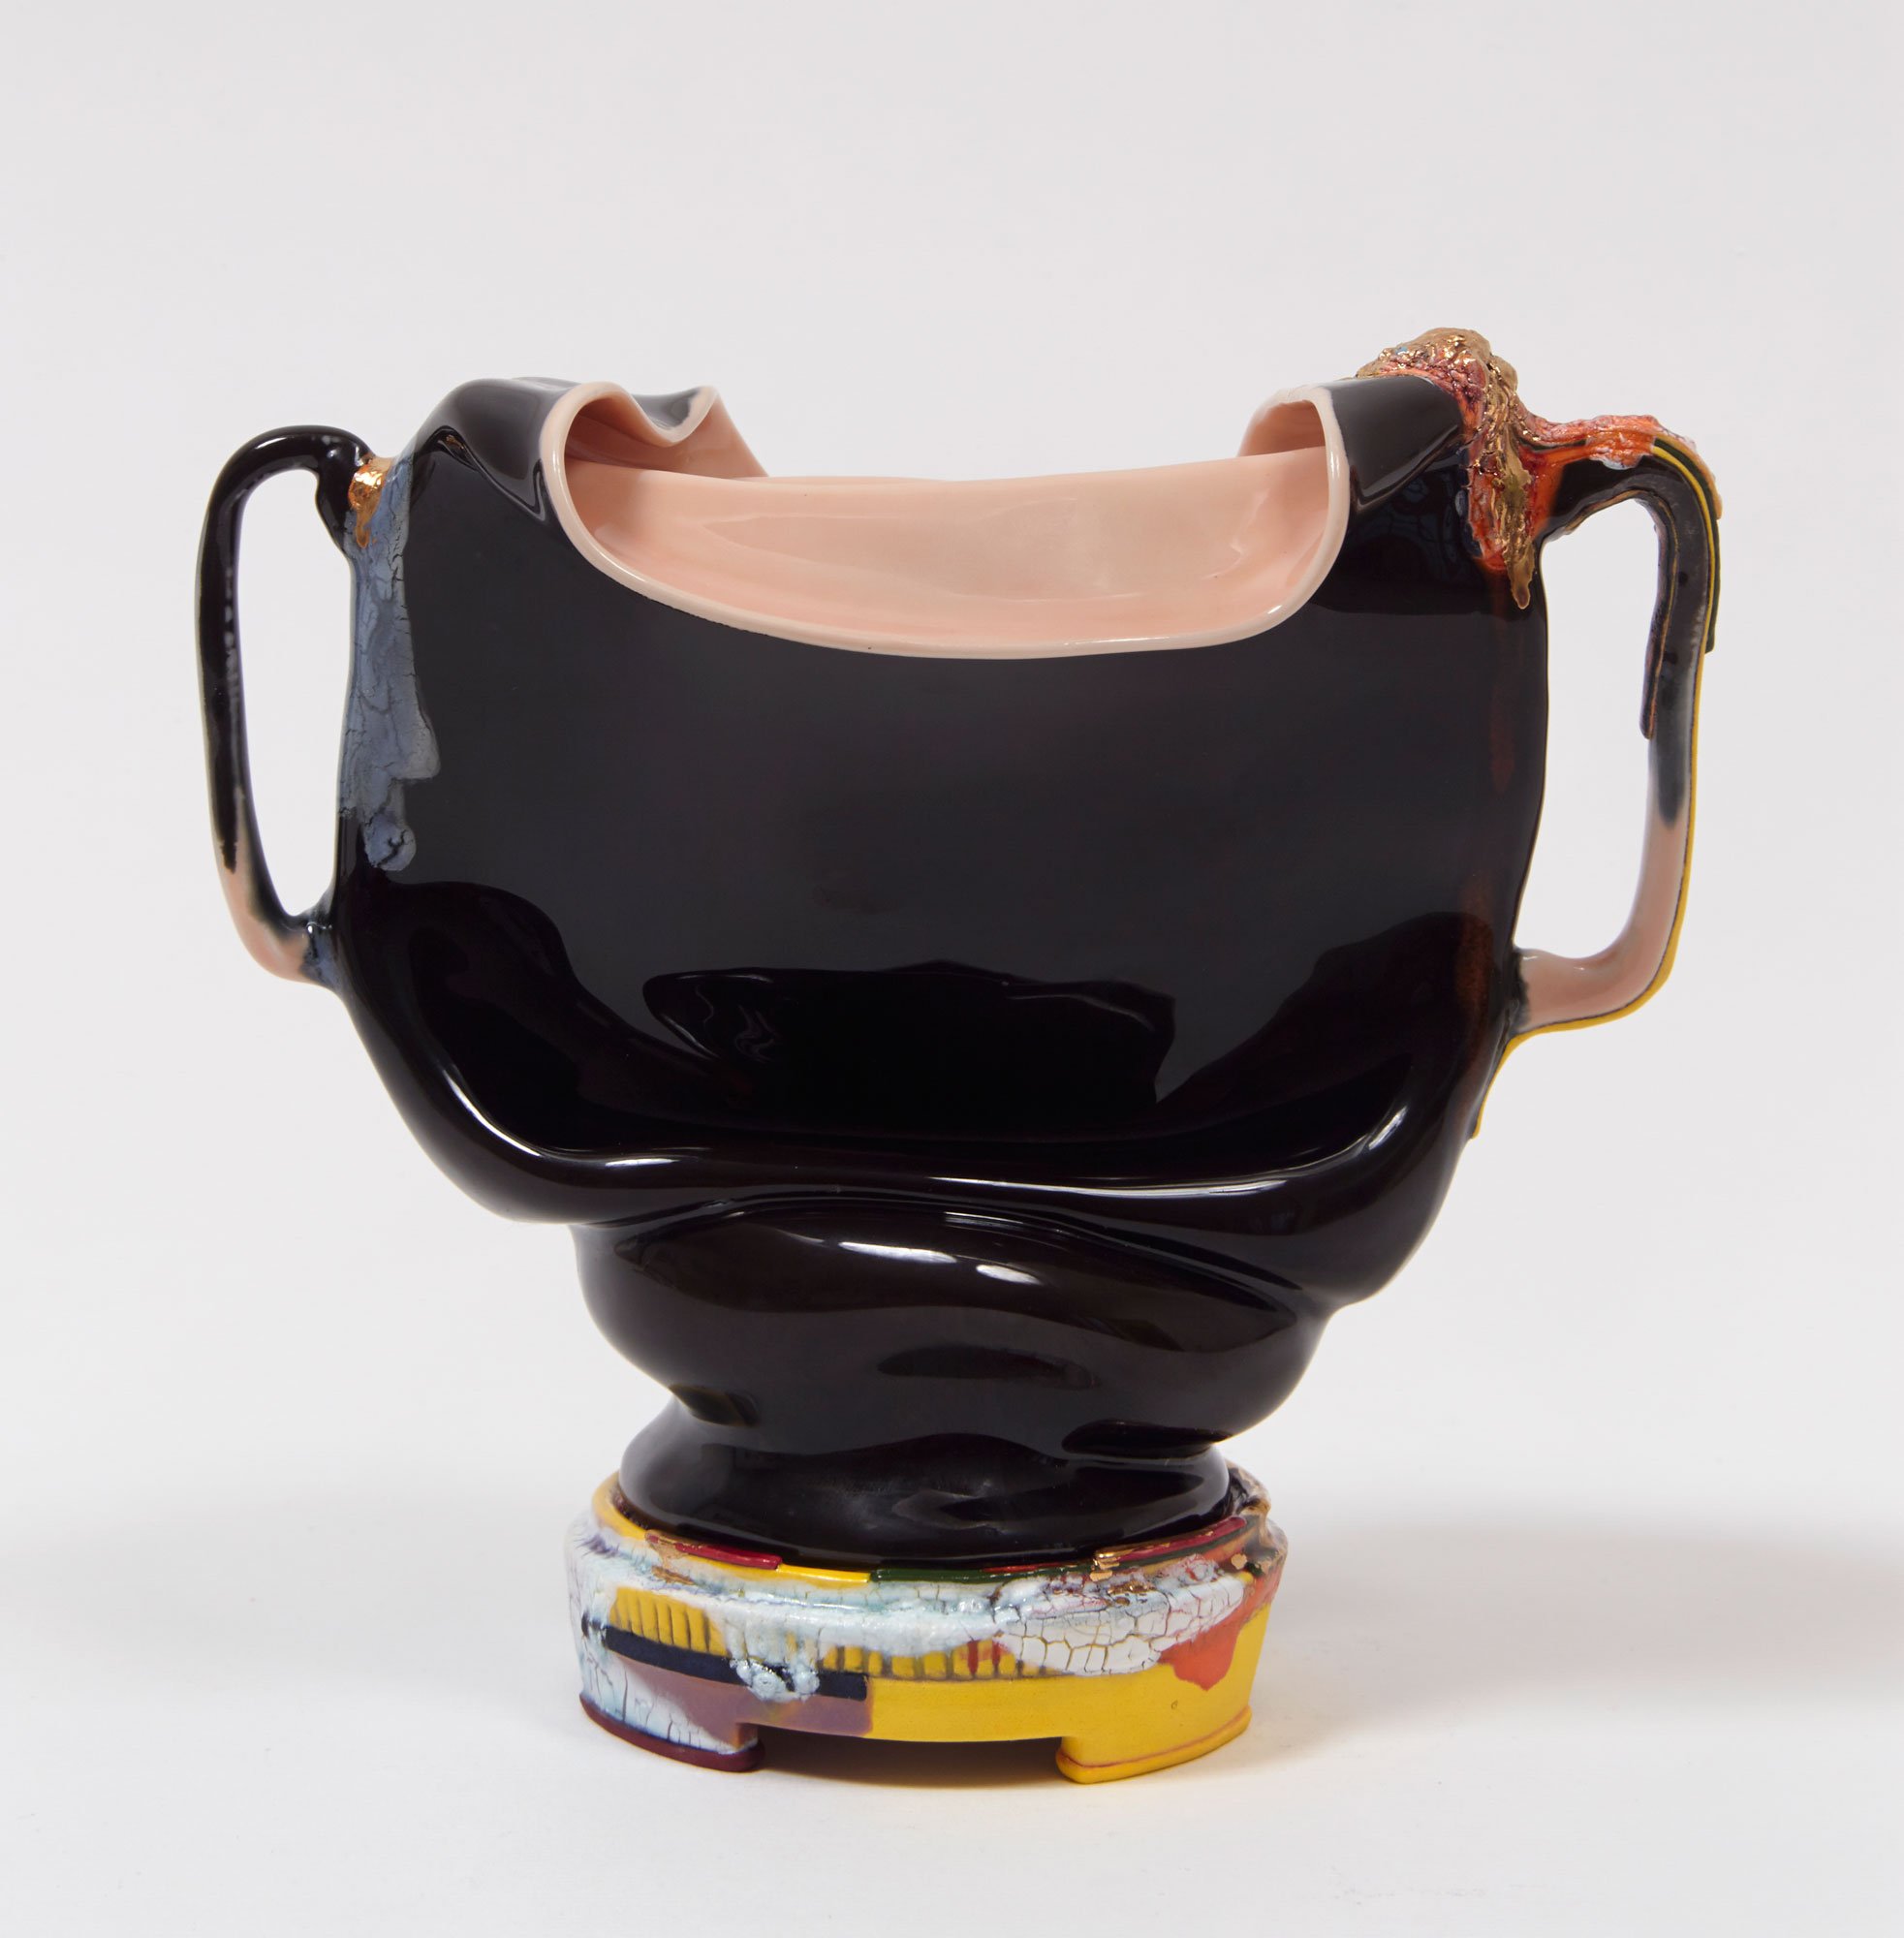  Kathy Butterly (United States, born 1963),  Tangsome , 2015, clay, glaze, 5 1/8 x 5 1/2 x 2 x 5/16 inches. Collection of Ted Rowland, Arlington, TX. © Kathy Butterly. Image courtesy the artist and James Cohan, New York. Photo: Alan Wiener.  